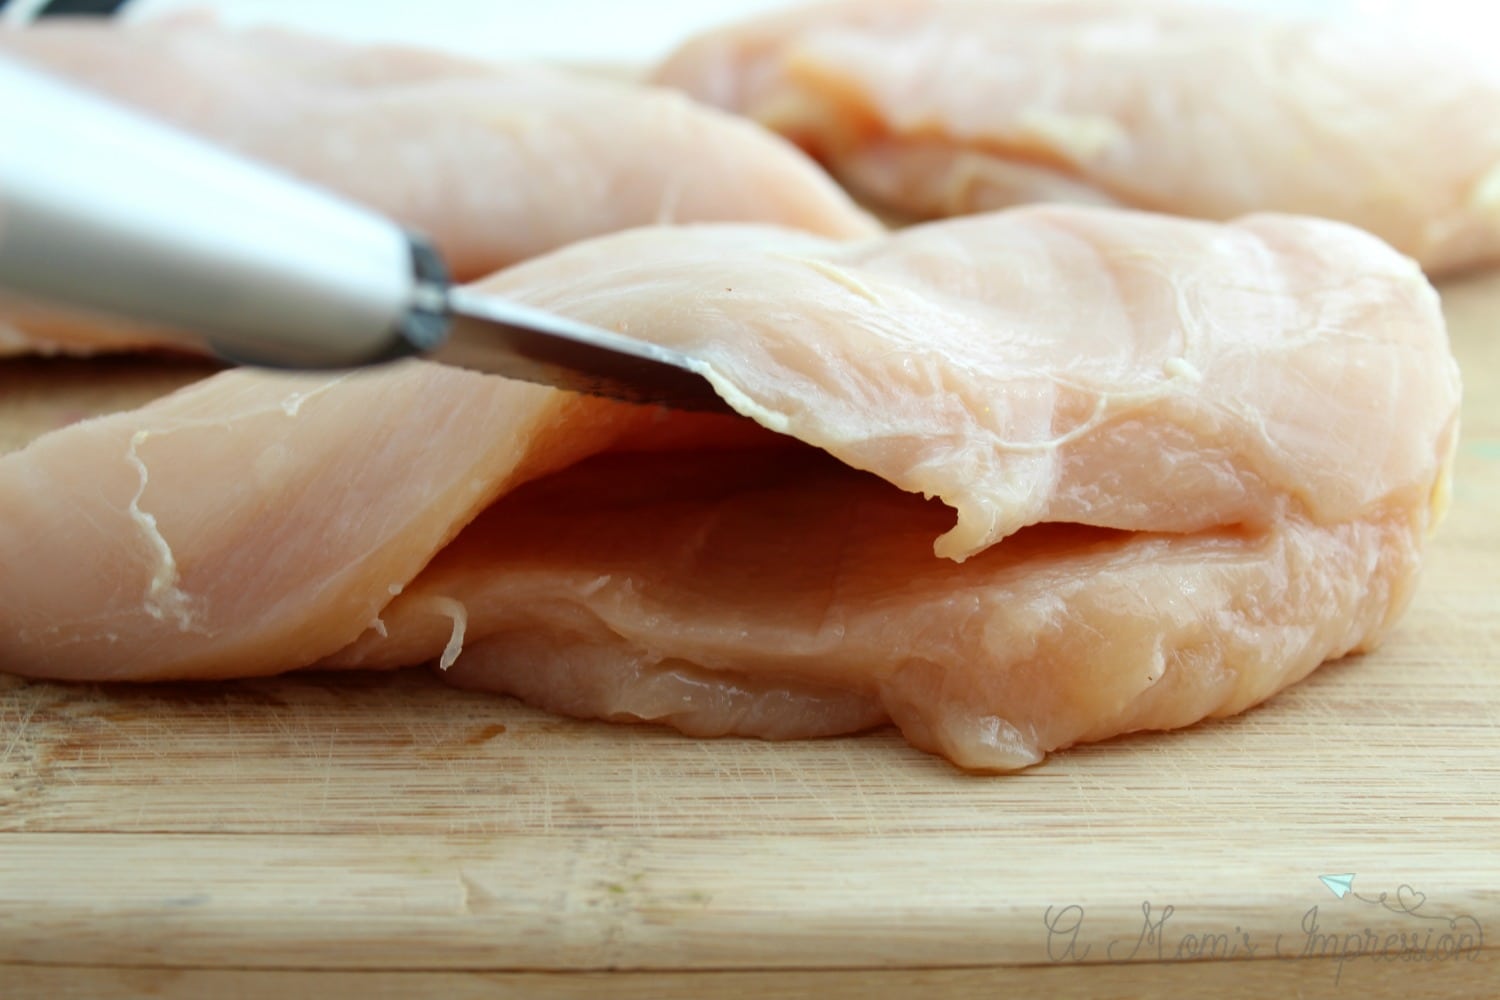 Using the knife to help stuff chicken breasts.